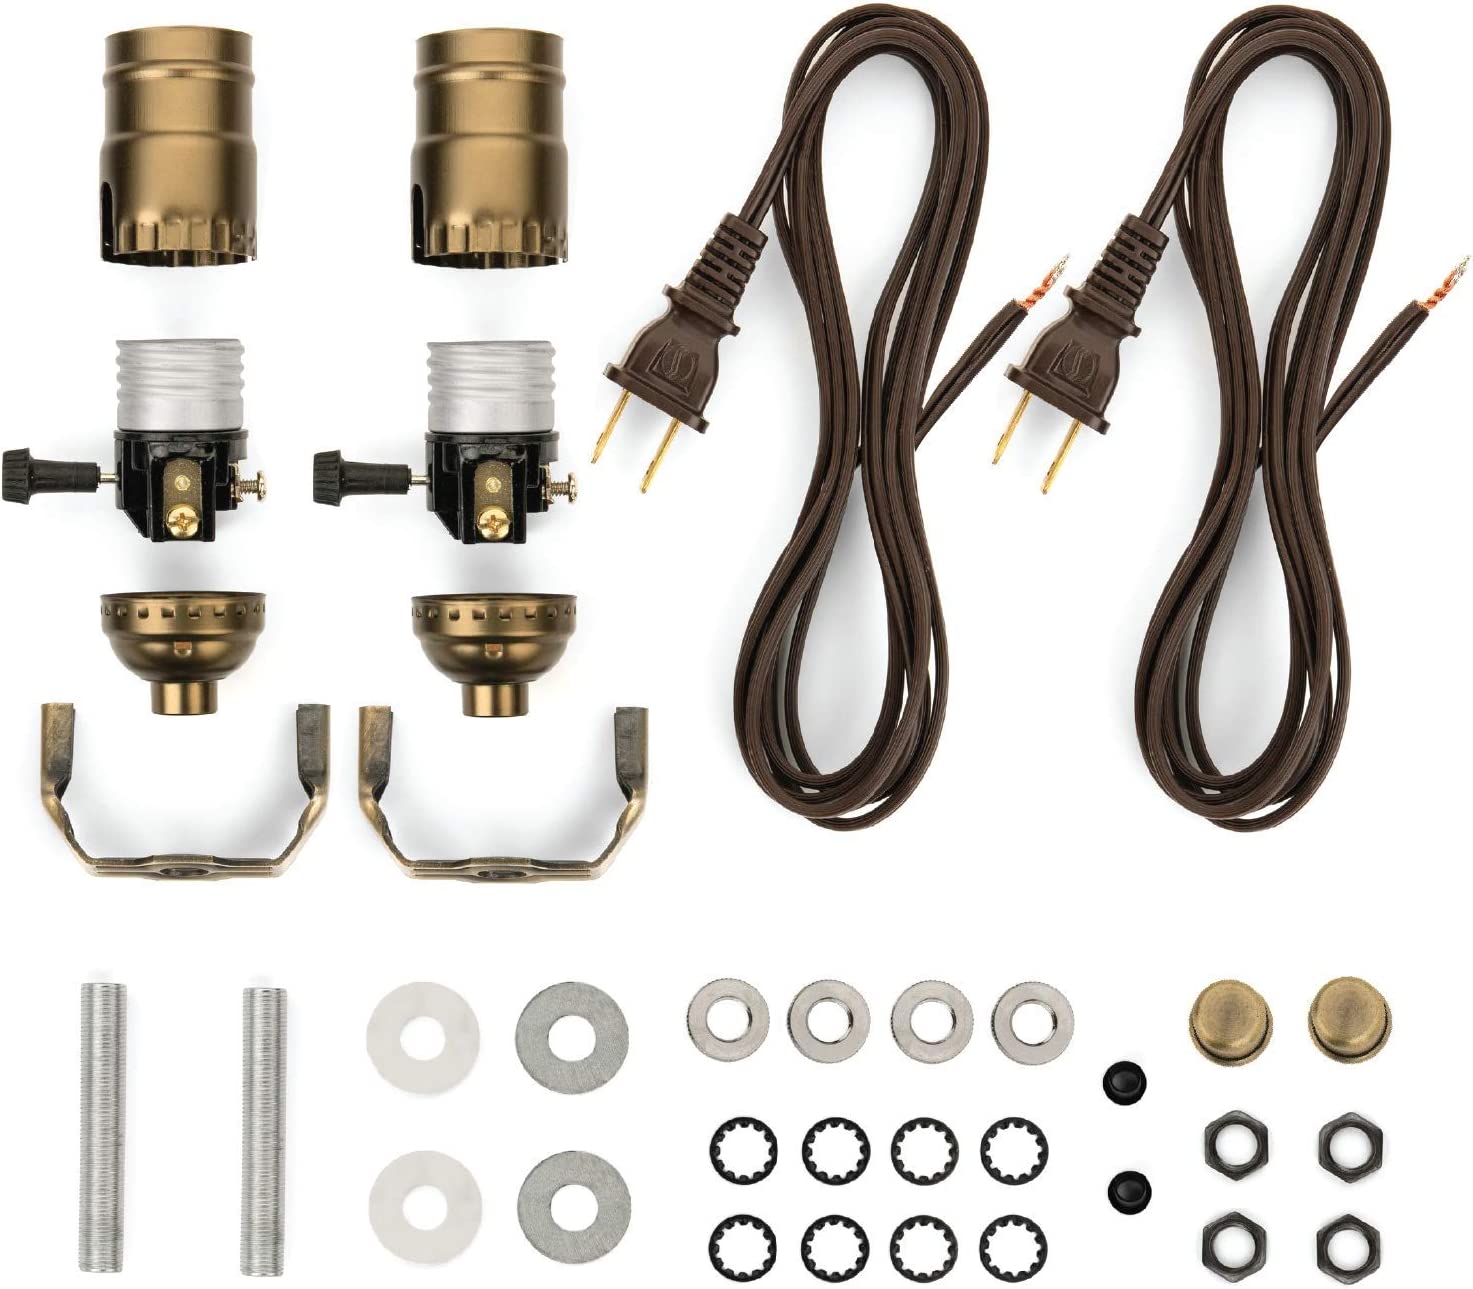 Lamp Socket Replacement Kit, Lamp Parts for Rewire or Repair Table and  Floor Lamps, Includes 3